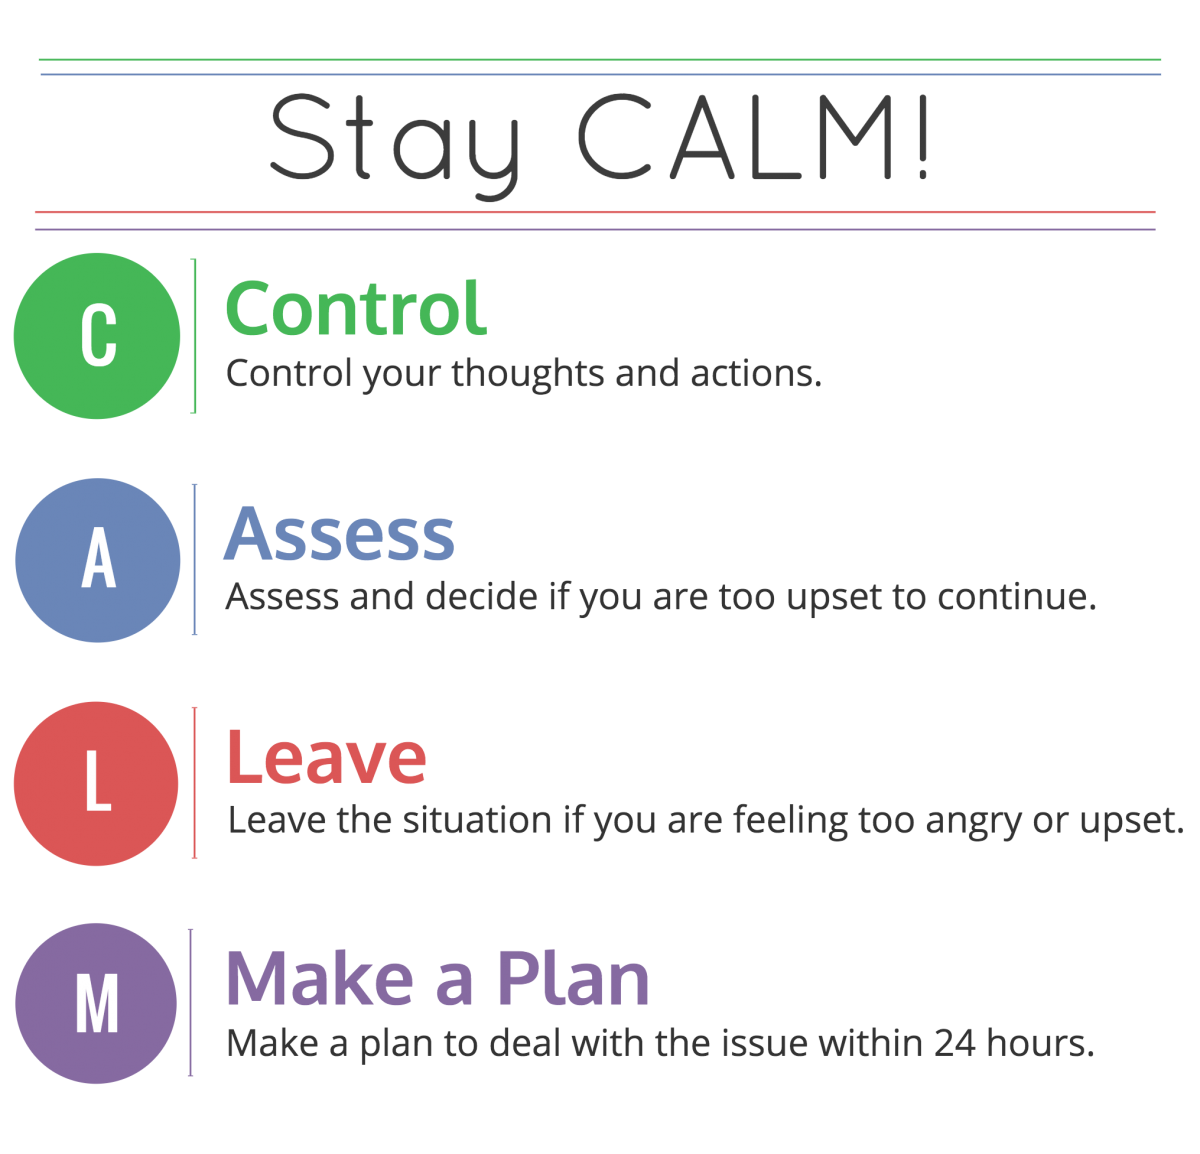 Stay Calm To Aid Communication: Control your thoughts and actions. Assess and decide if you are too upset to continue. Leave the situation if you are feeling too angry or upset. Make a plan to deal with the situation within 24 hours.